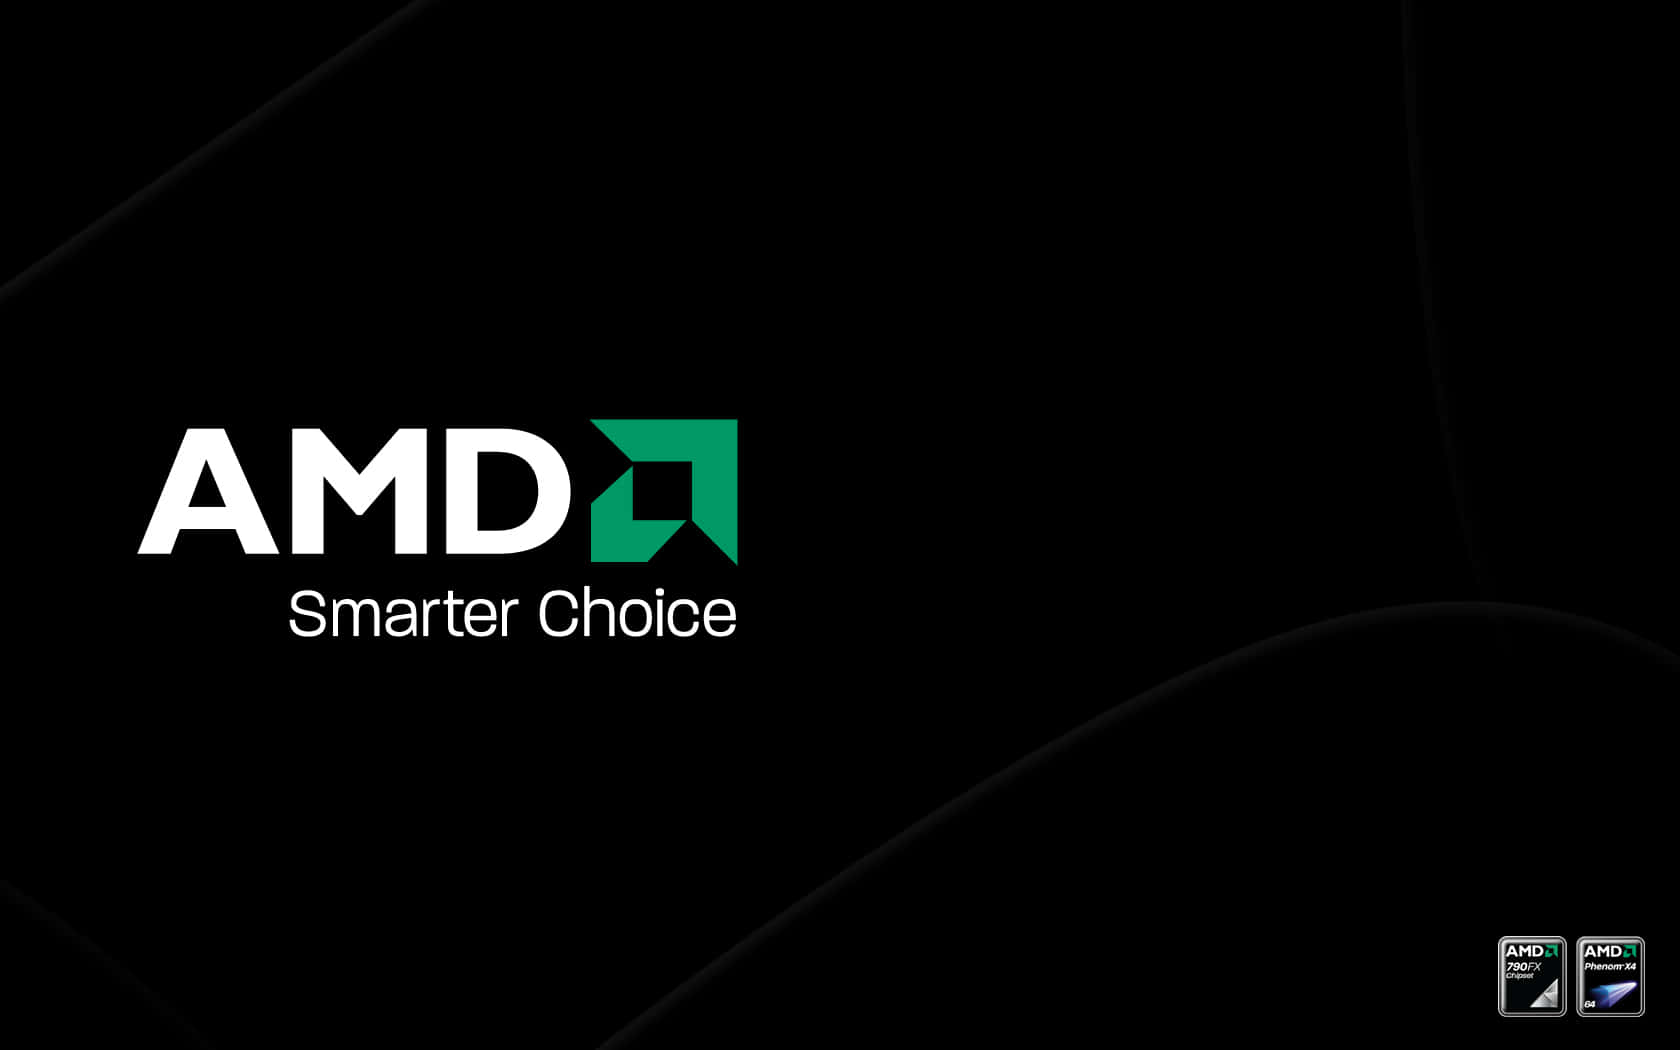 AMD offers unparalleled performance